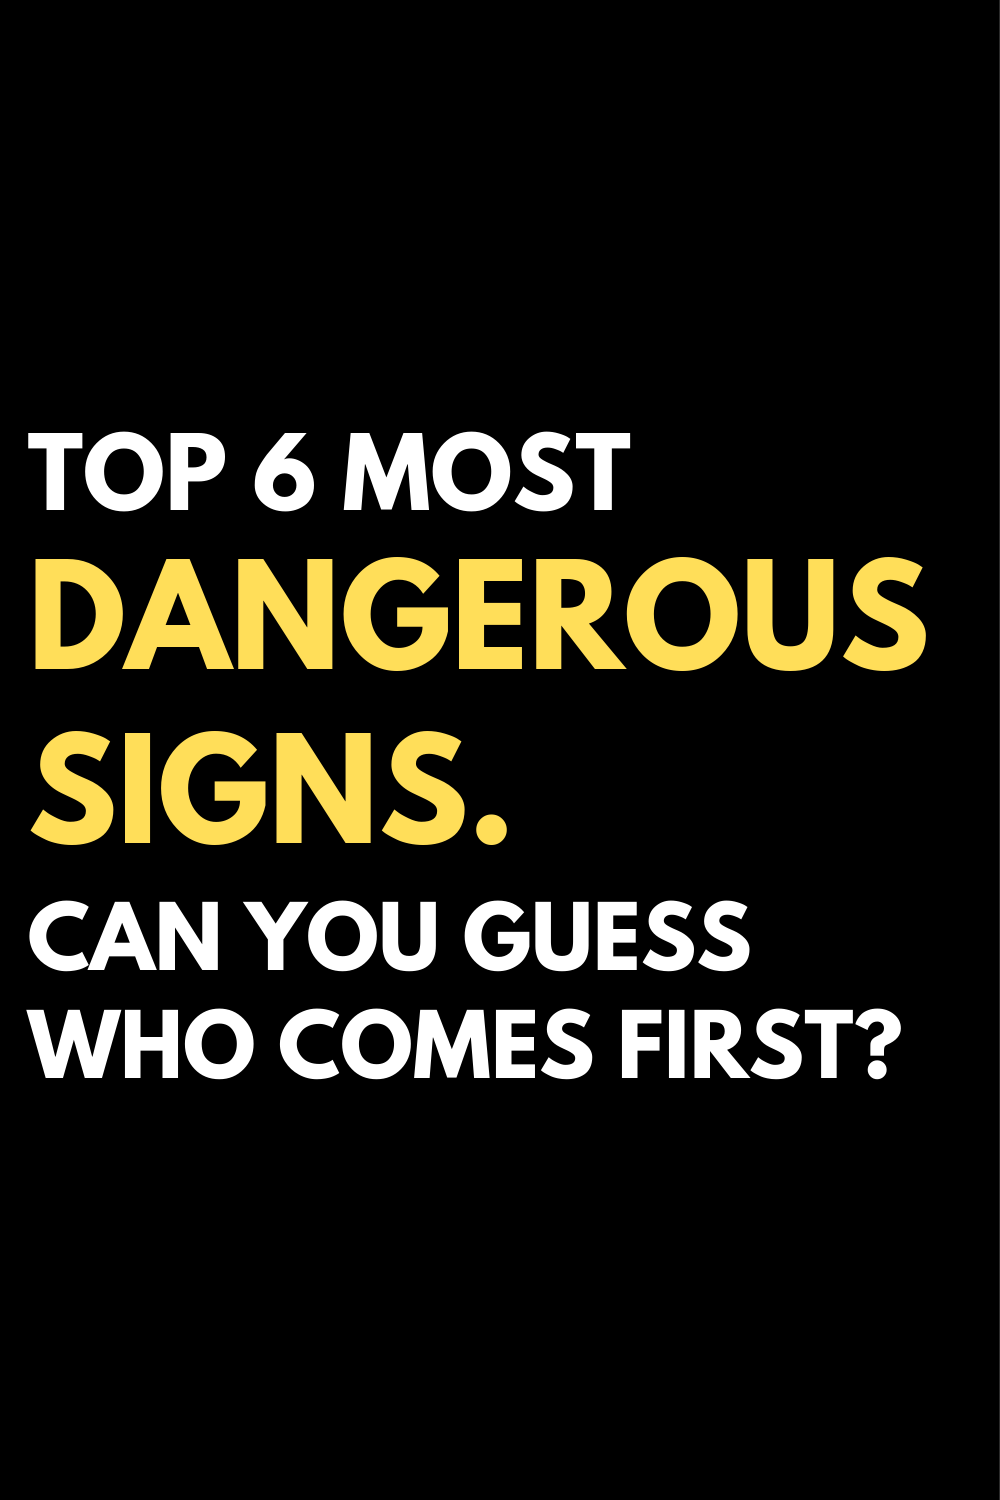 Top 6 most dangerous signs. Can you guess who comes first?